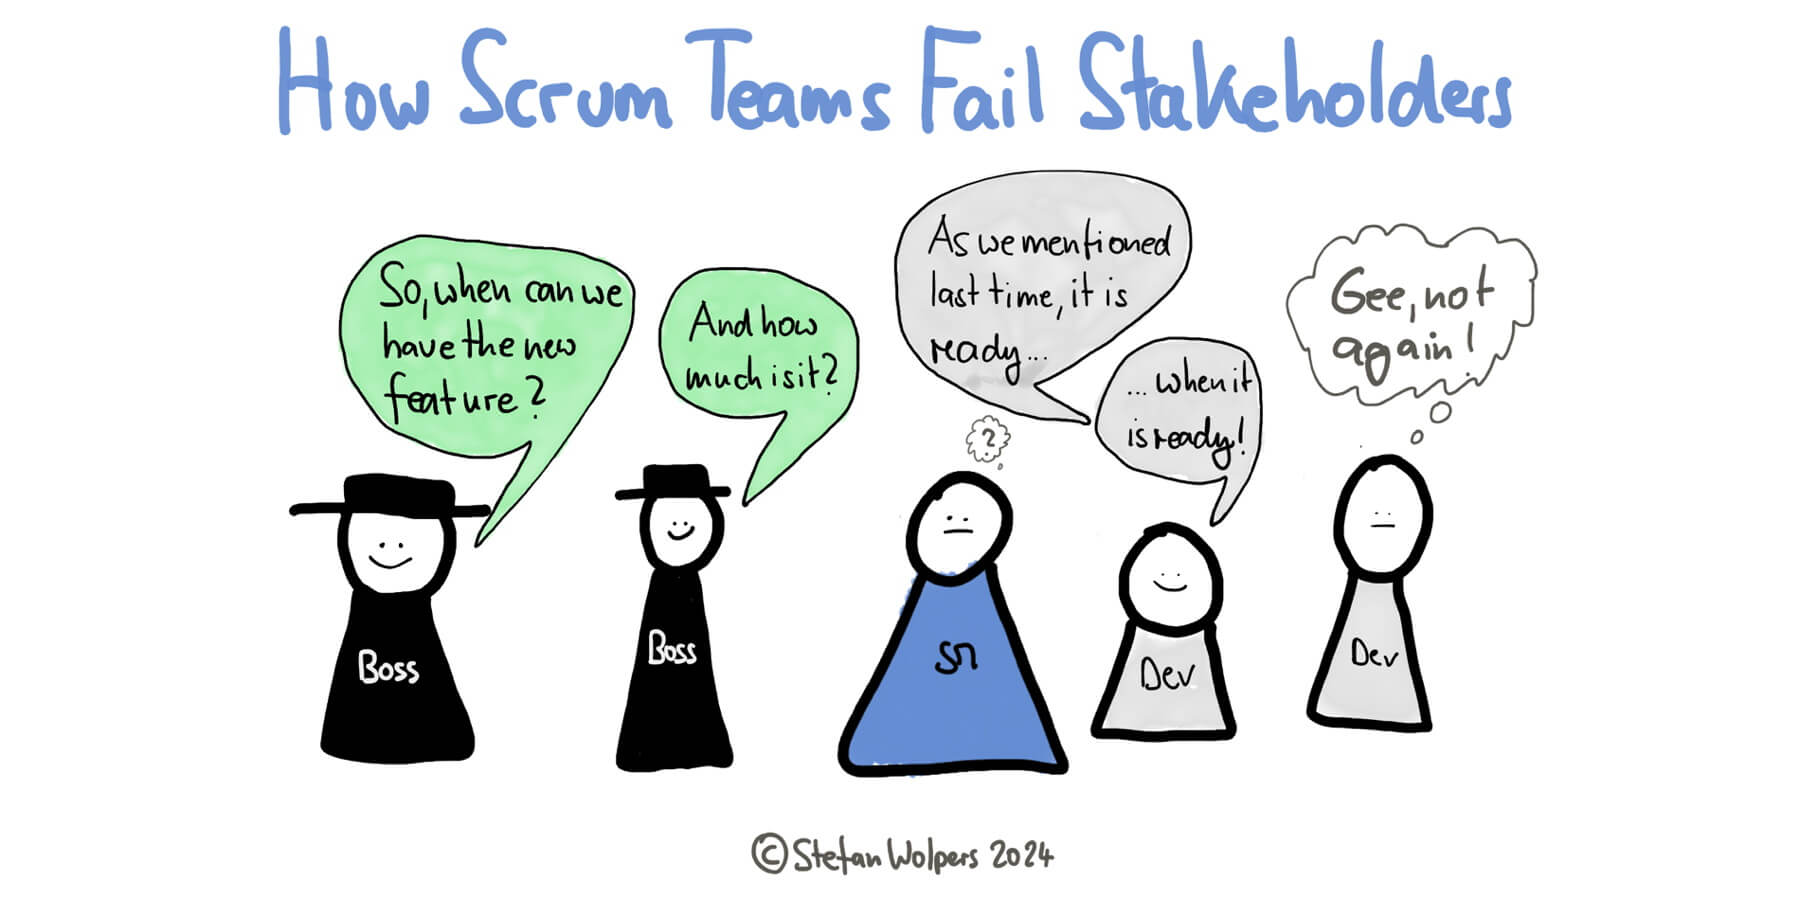 How Scrum Teams Fail Stakeholders and What You Can Do About It — Berlin-Product-People.com